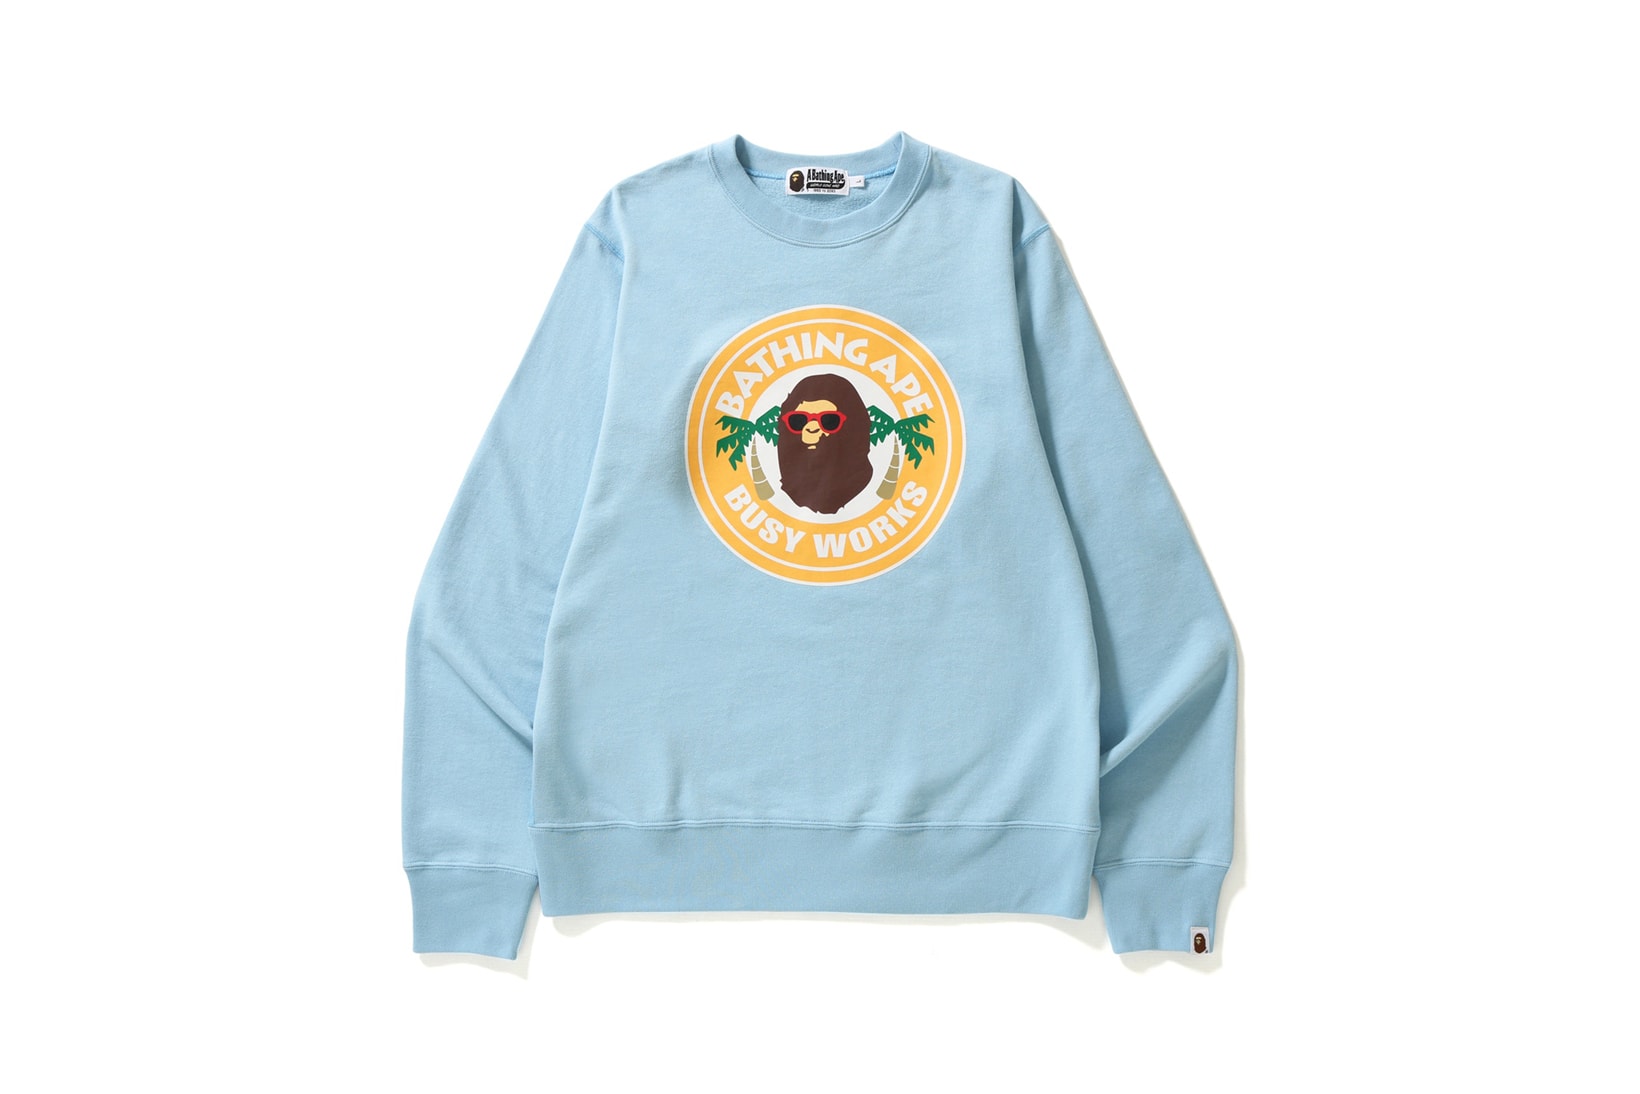 BAPE Los Angeles Capsule Collection T-Shirts Hoodies Sweaters Shorts Blue